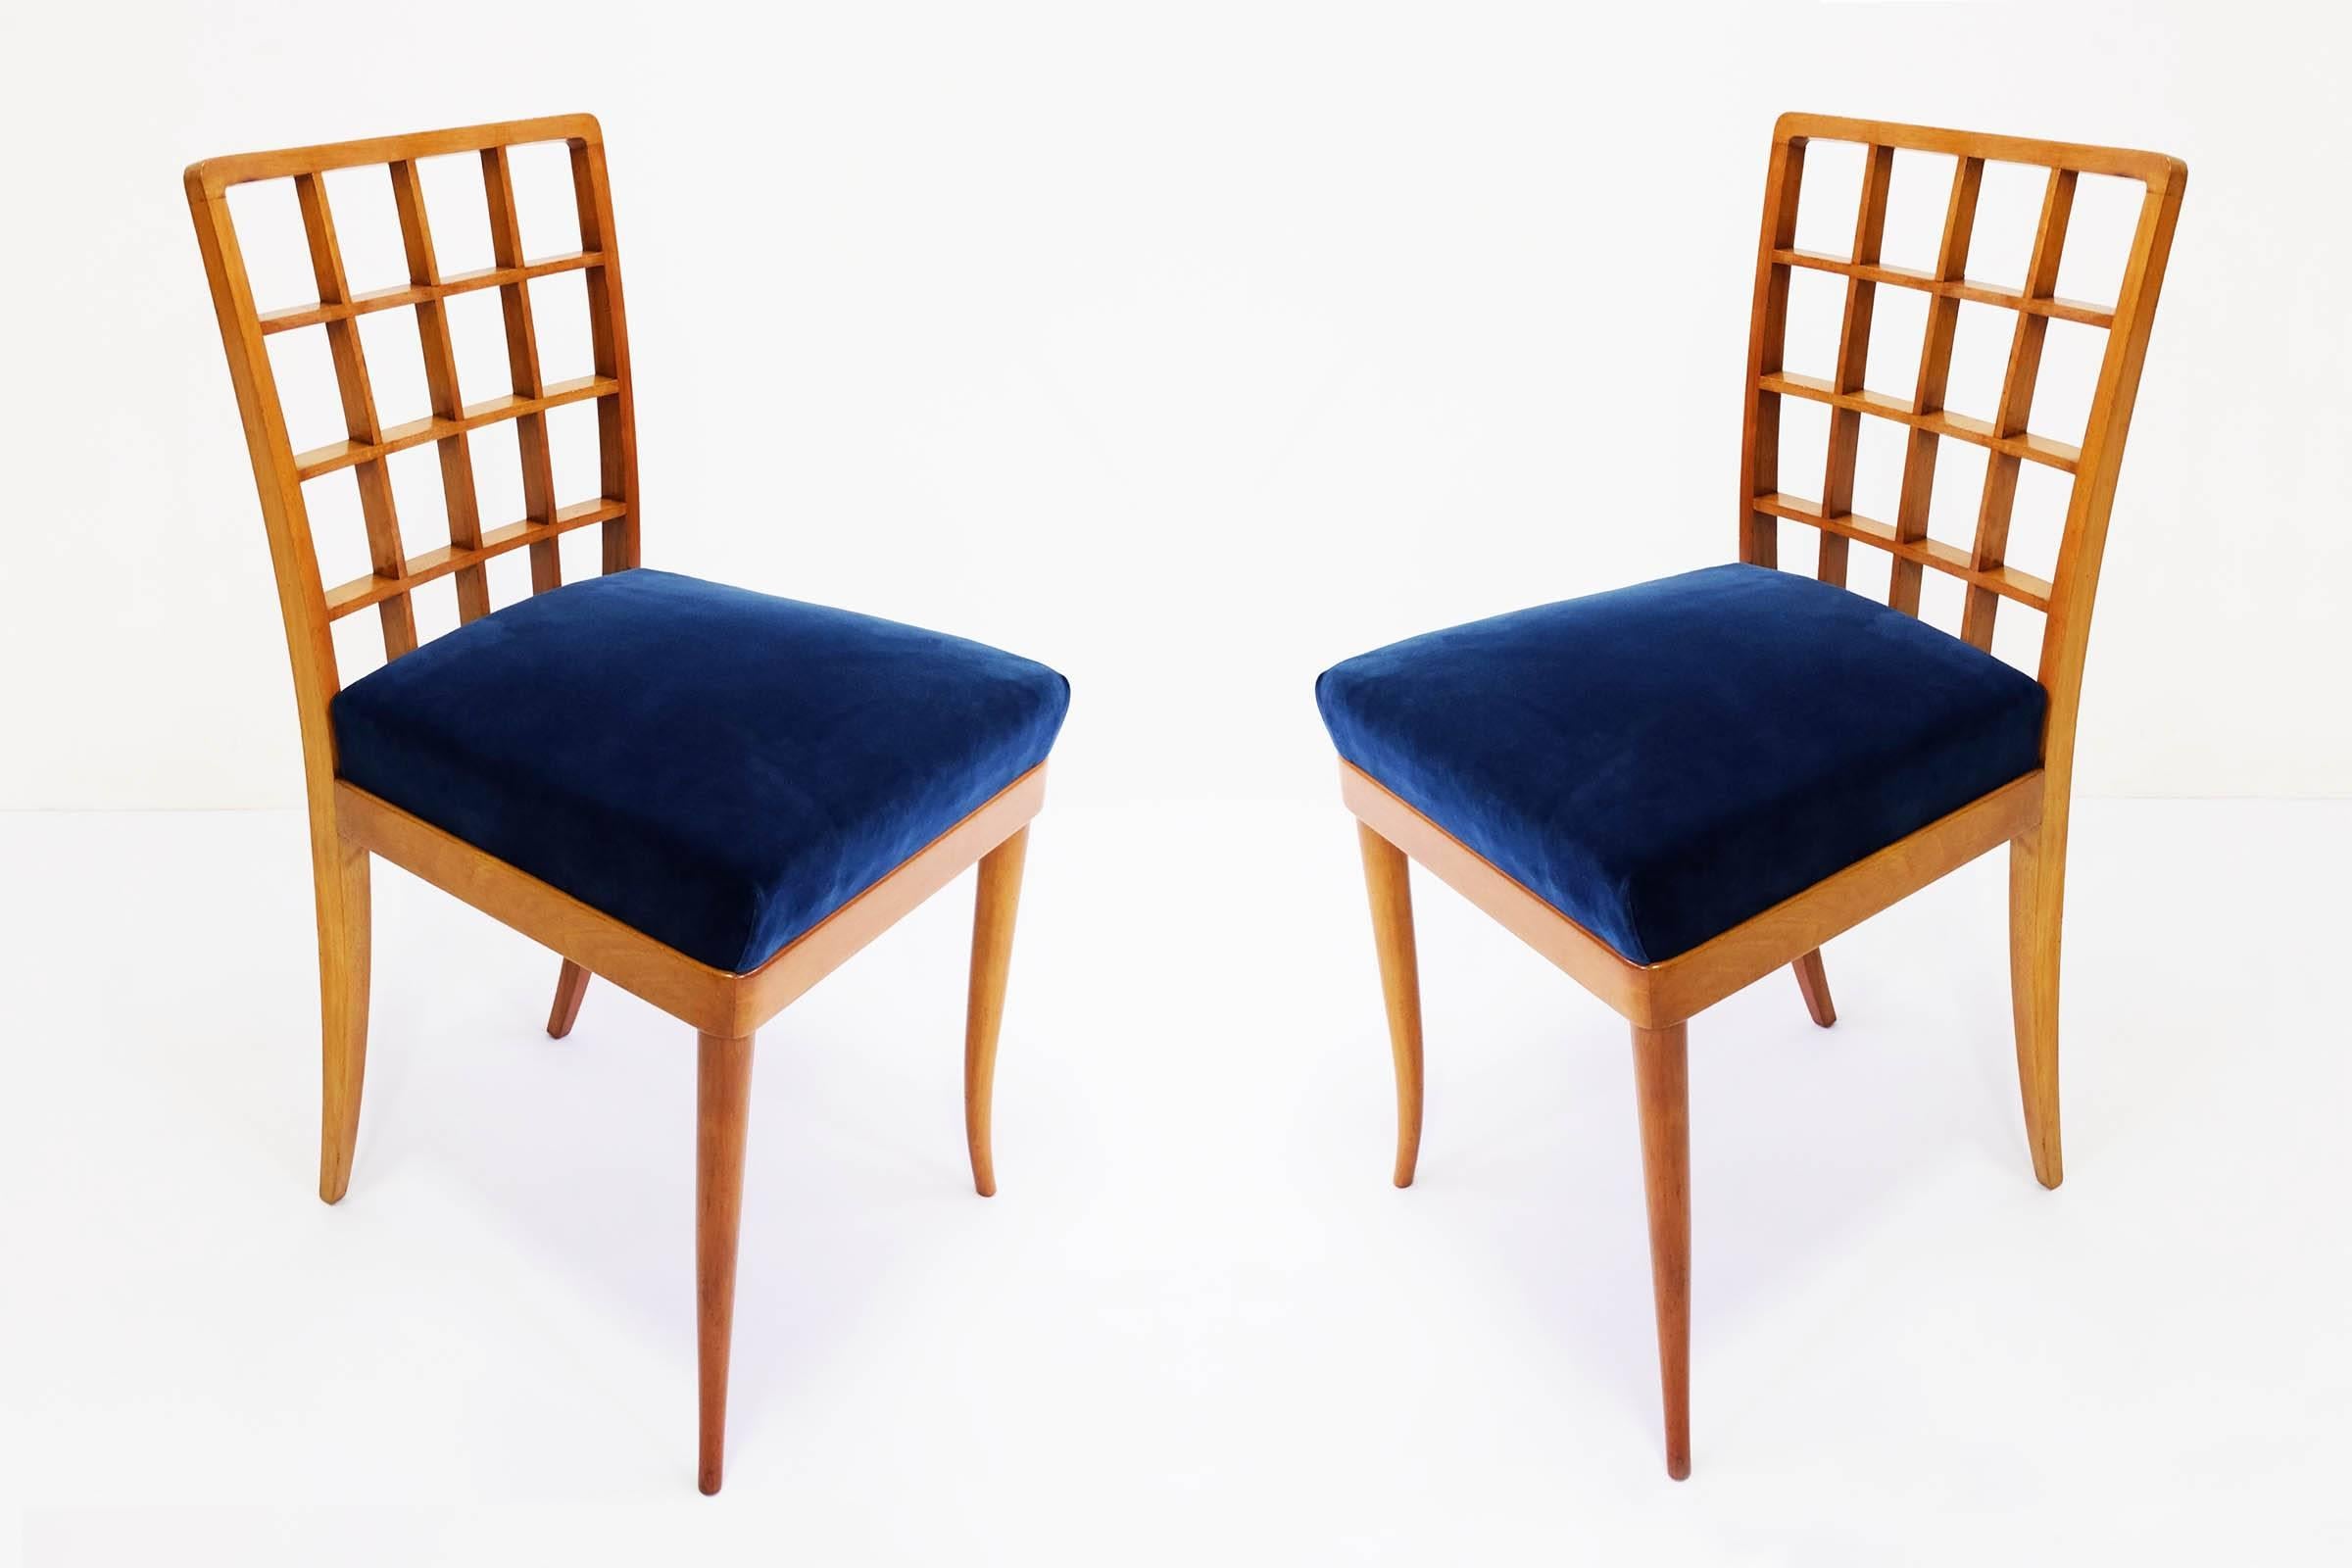 Very finely built with interlocking woods
Totally restored and new upholstery in 1st class deep blue velvet.